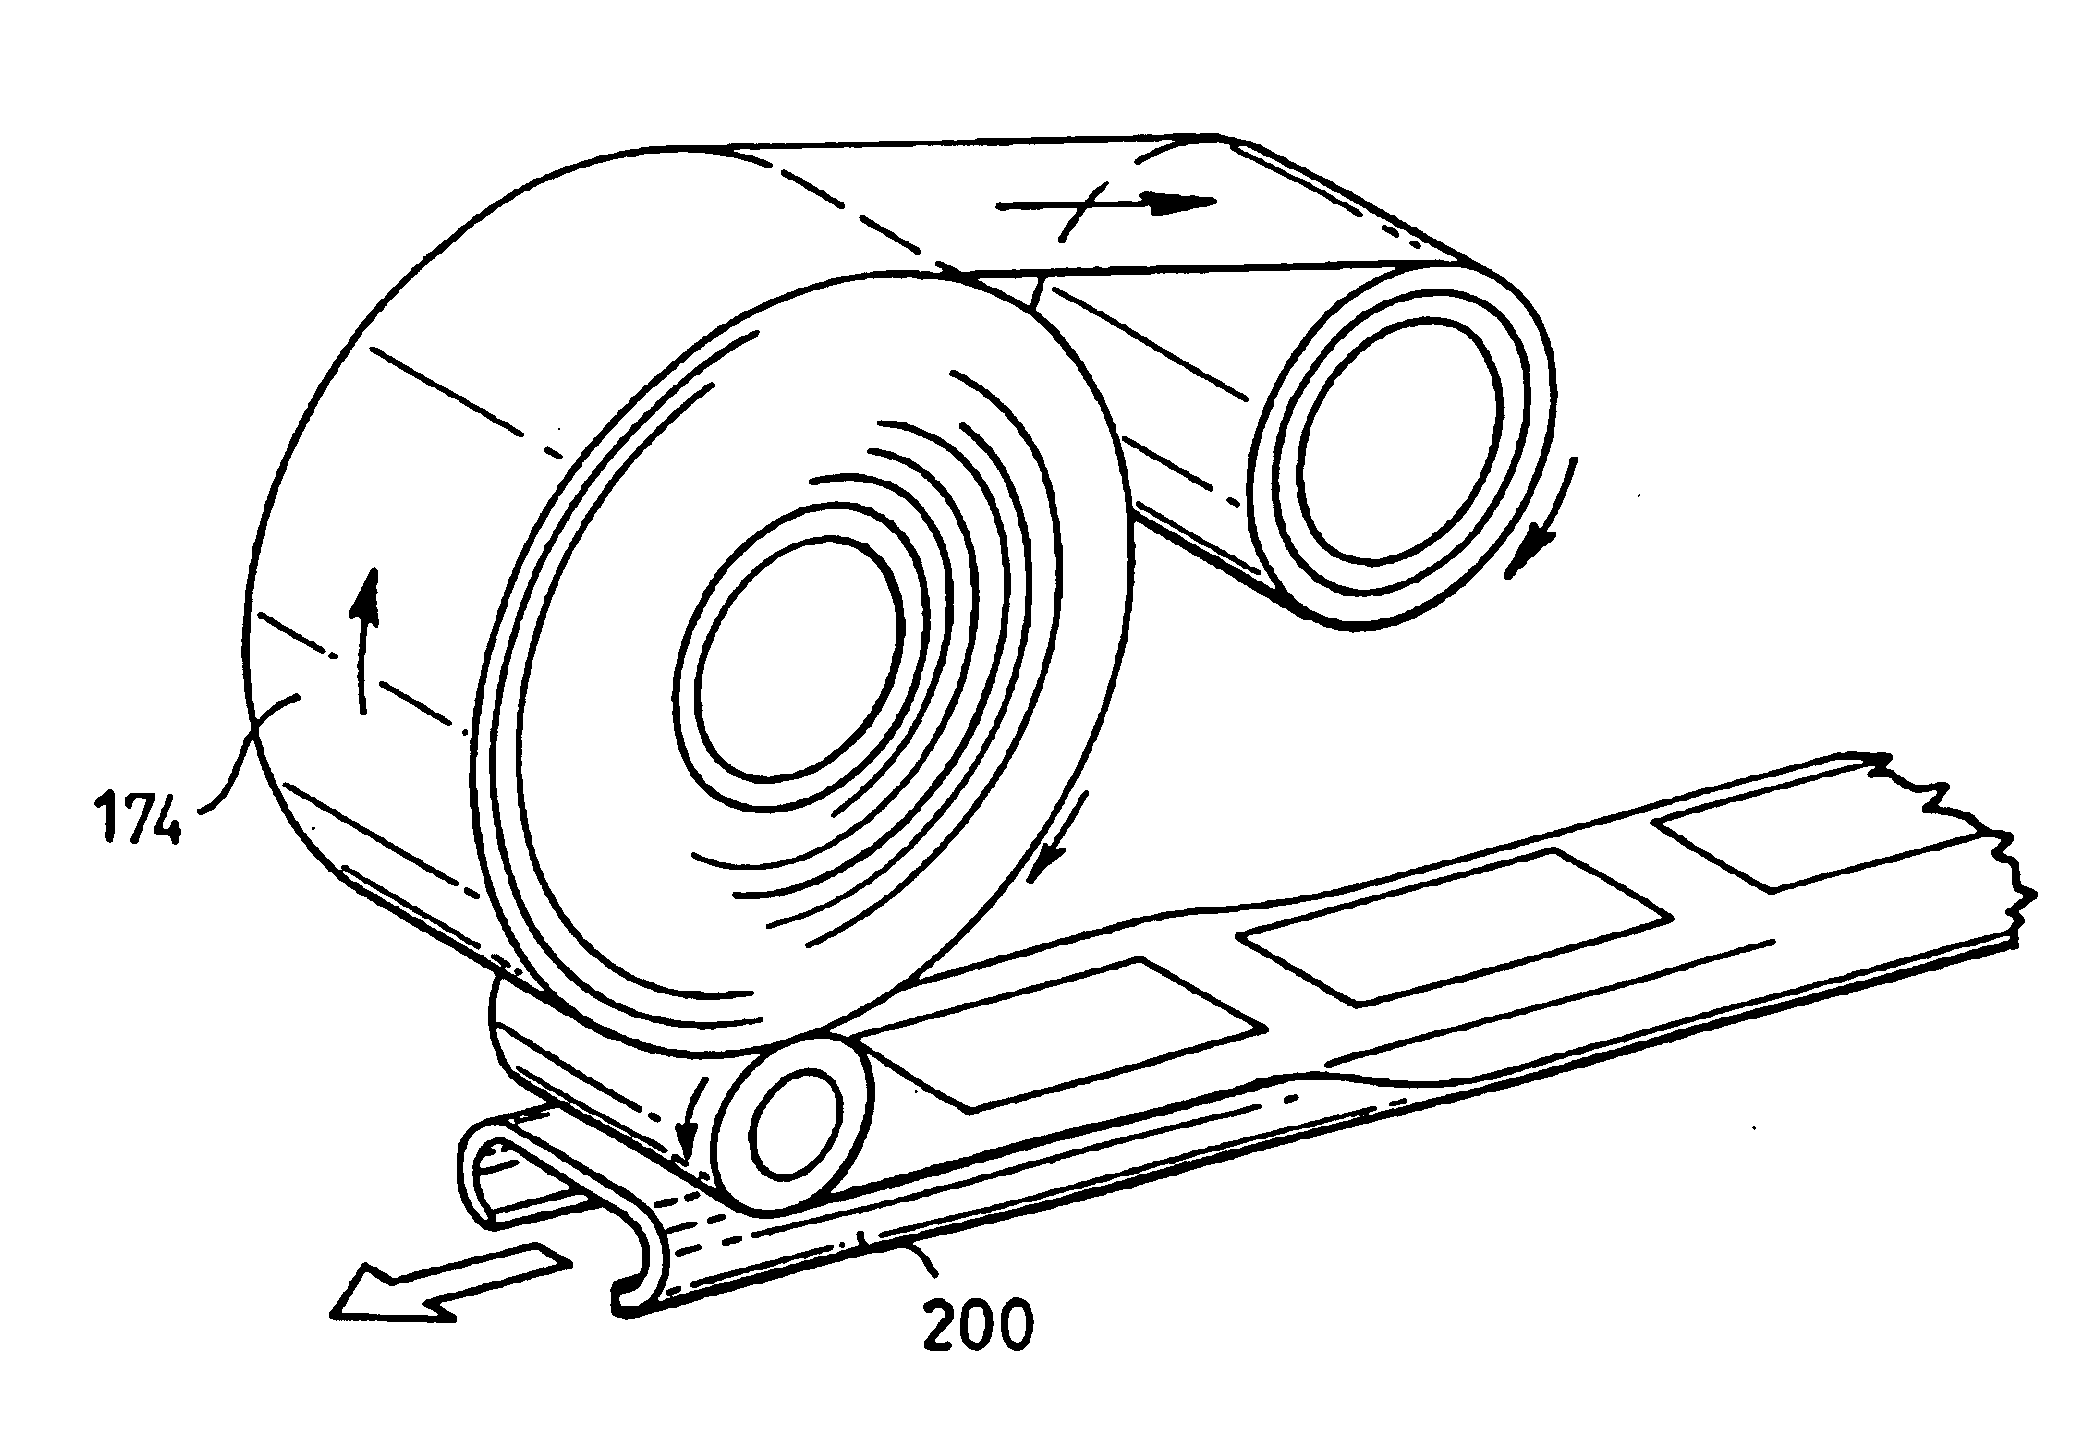 Method of applying and removing a protective film to the surface of a handrail for an escalator or moving walkway